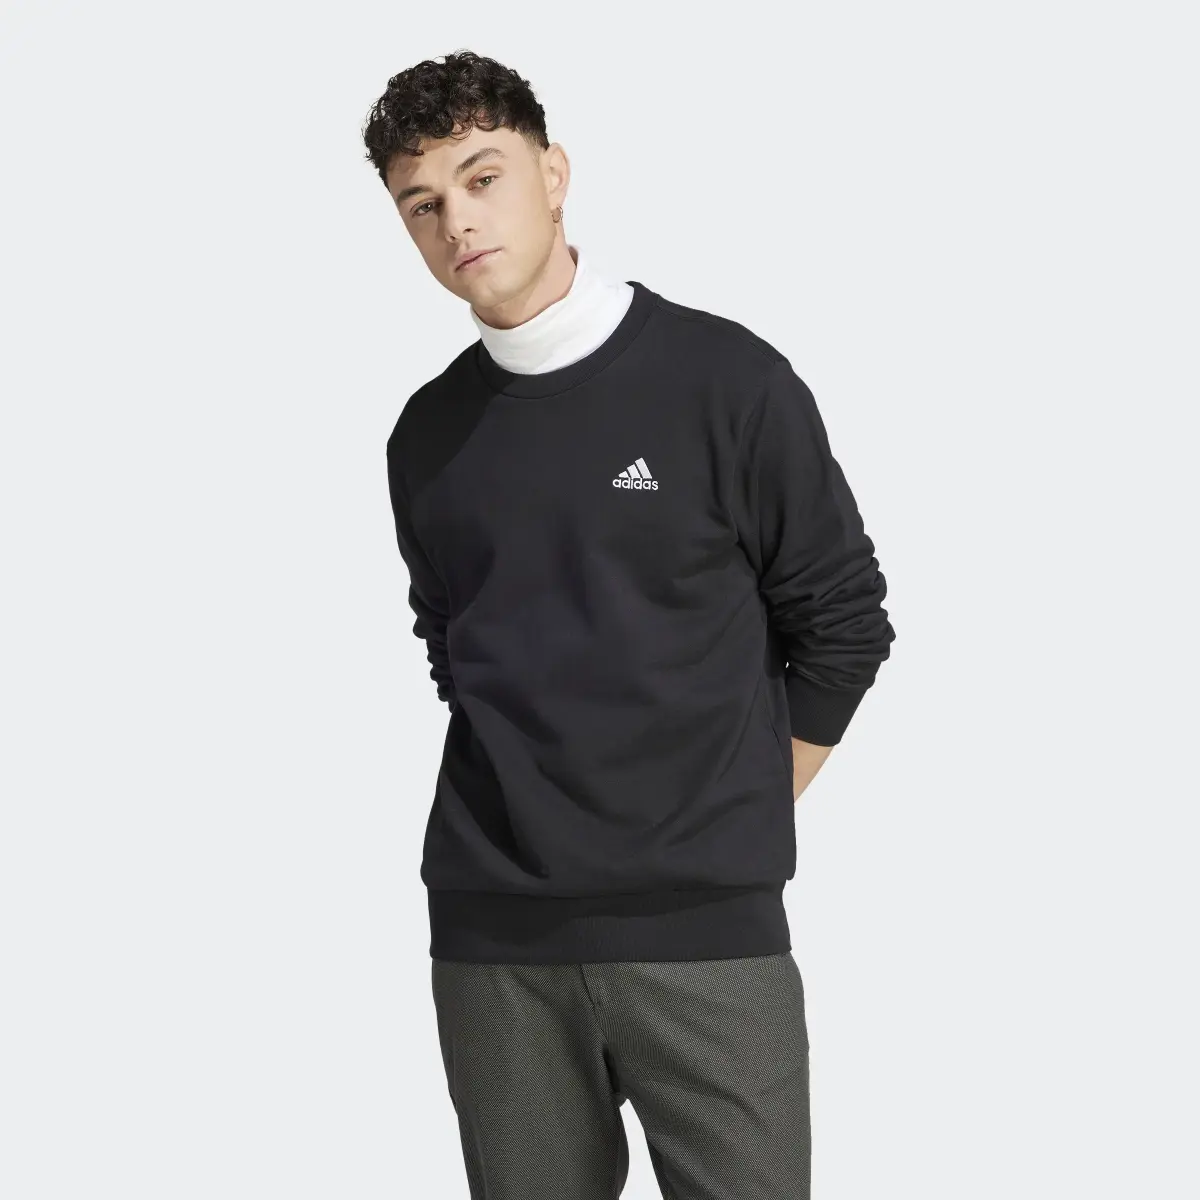 Adidas Essentials French Terry Embroidered Small Logo Sweatshirt. 2